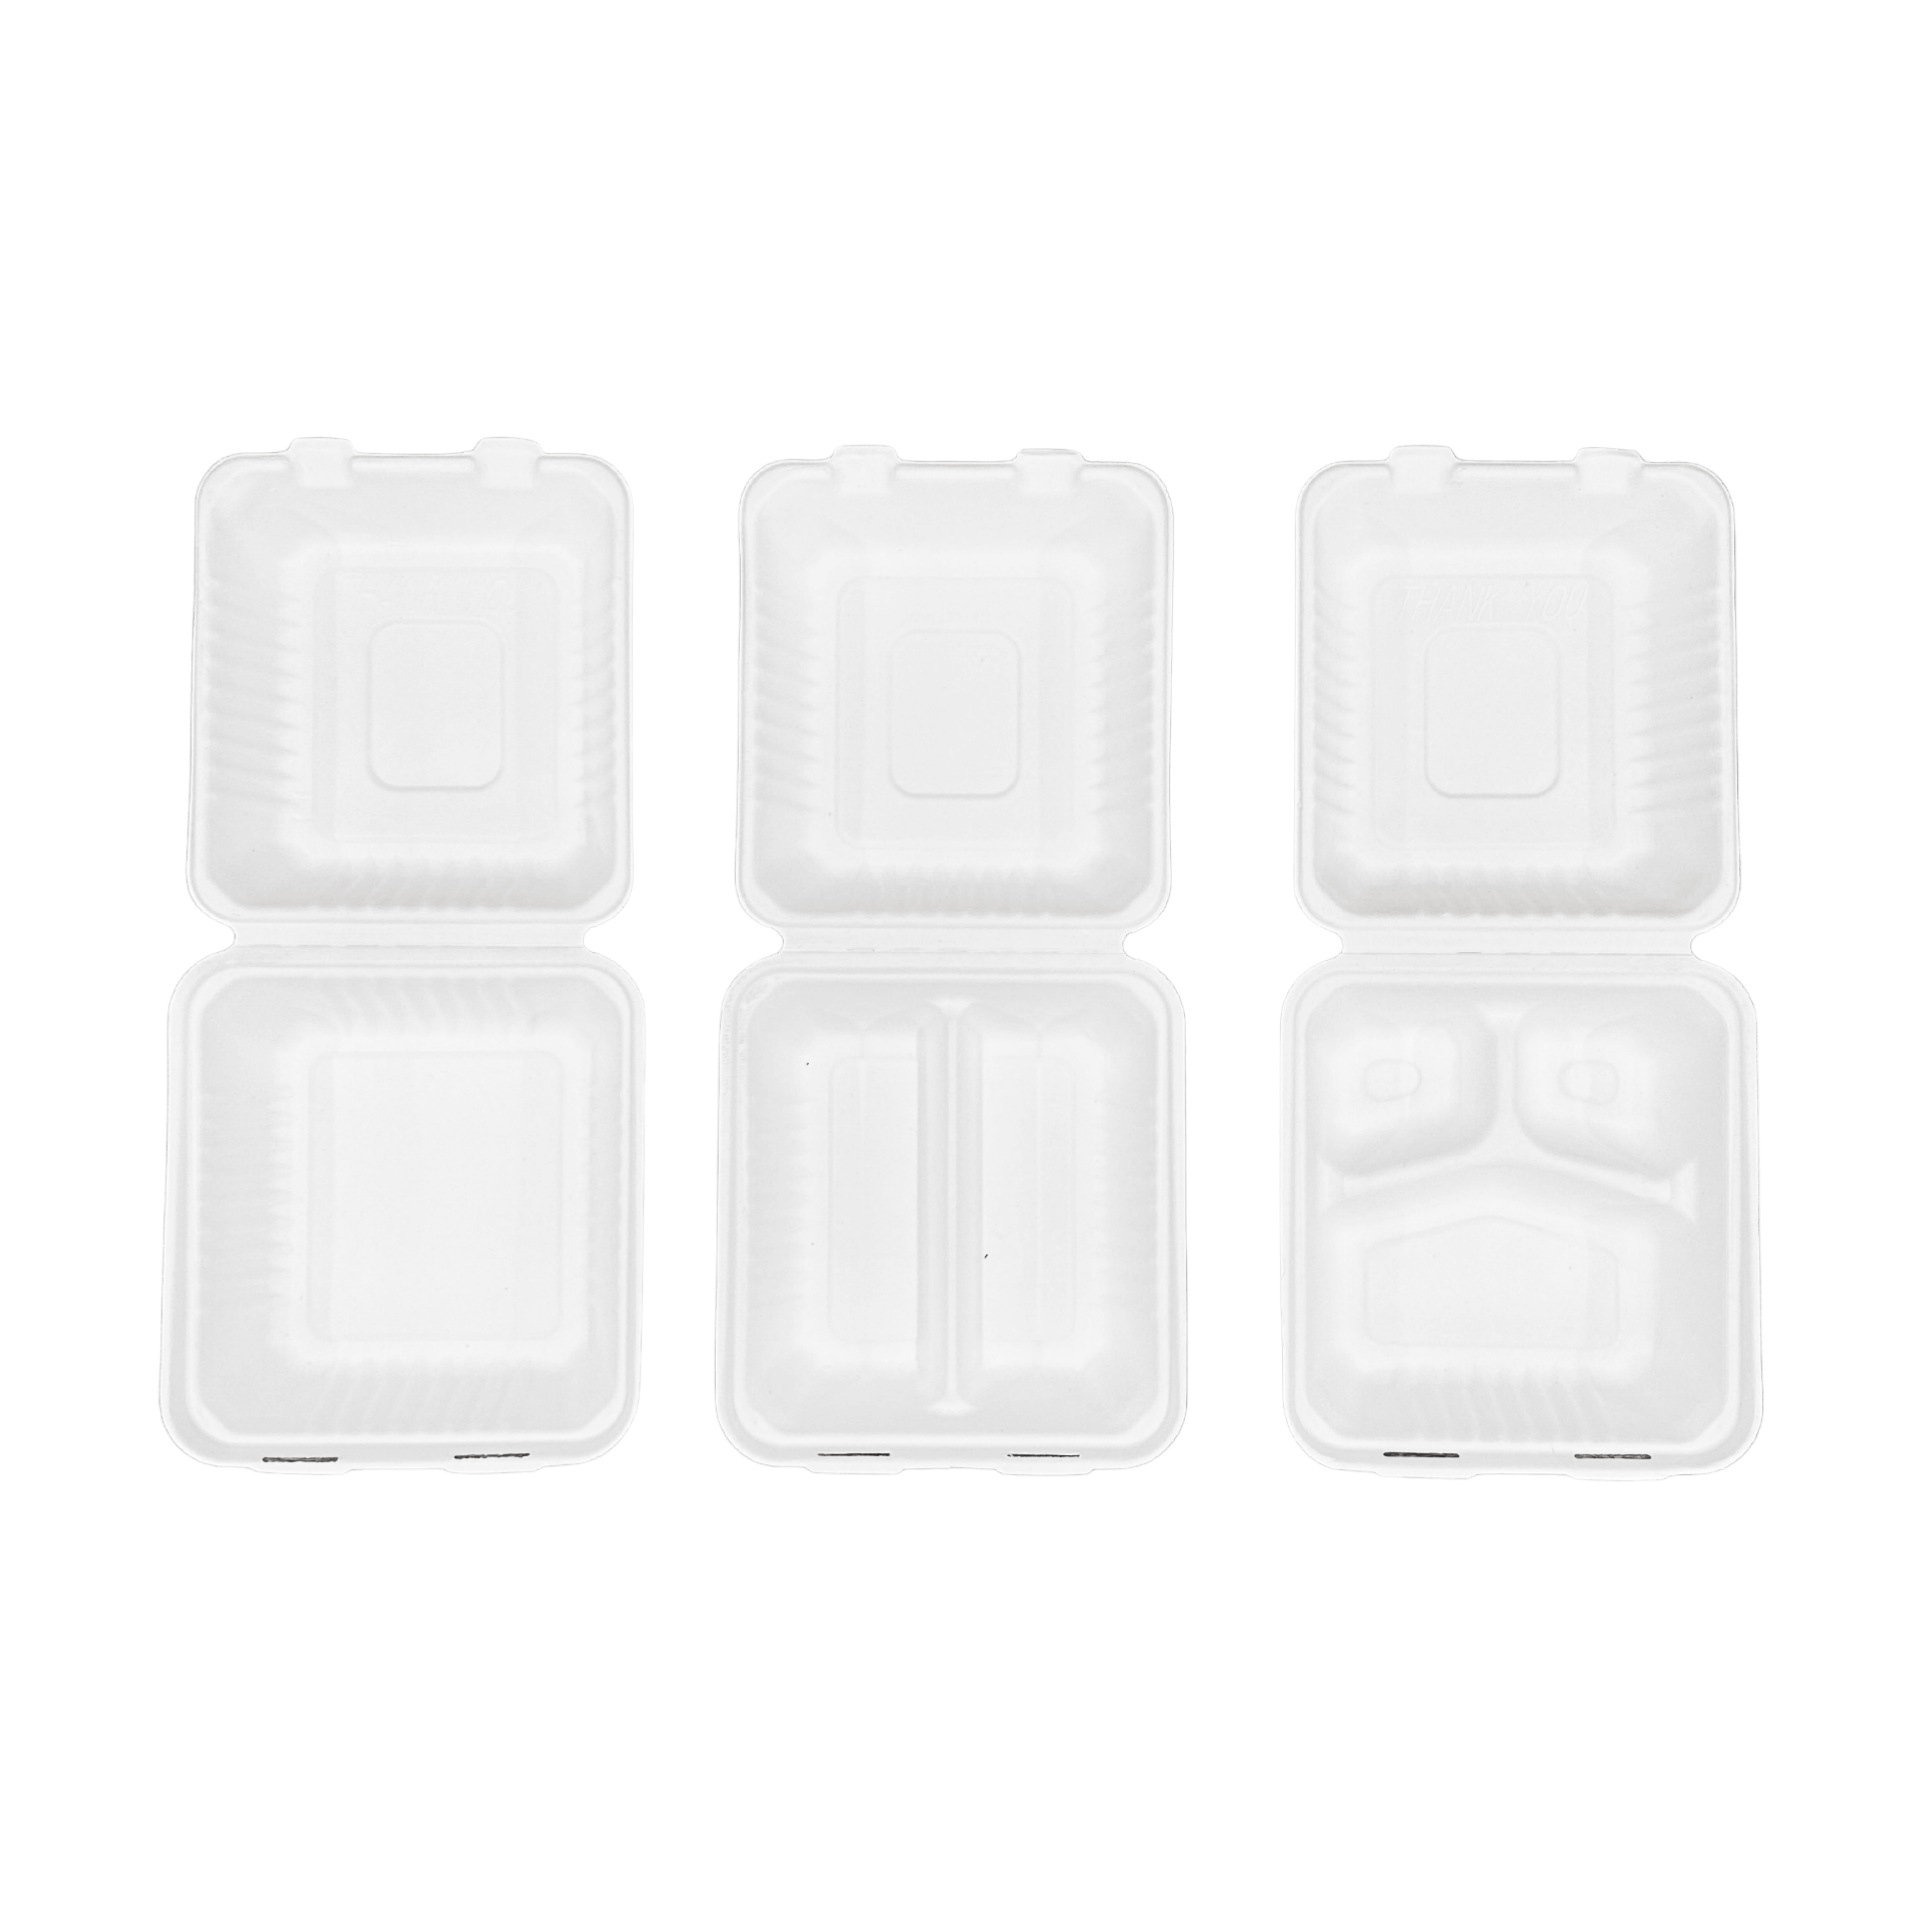 200 Pcs, 8x8x3'', 3-Compartment, Sugarcane Clamshell Food Container